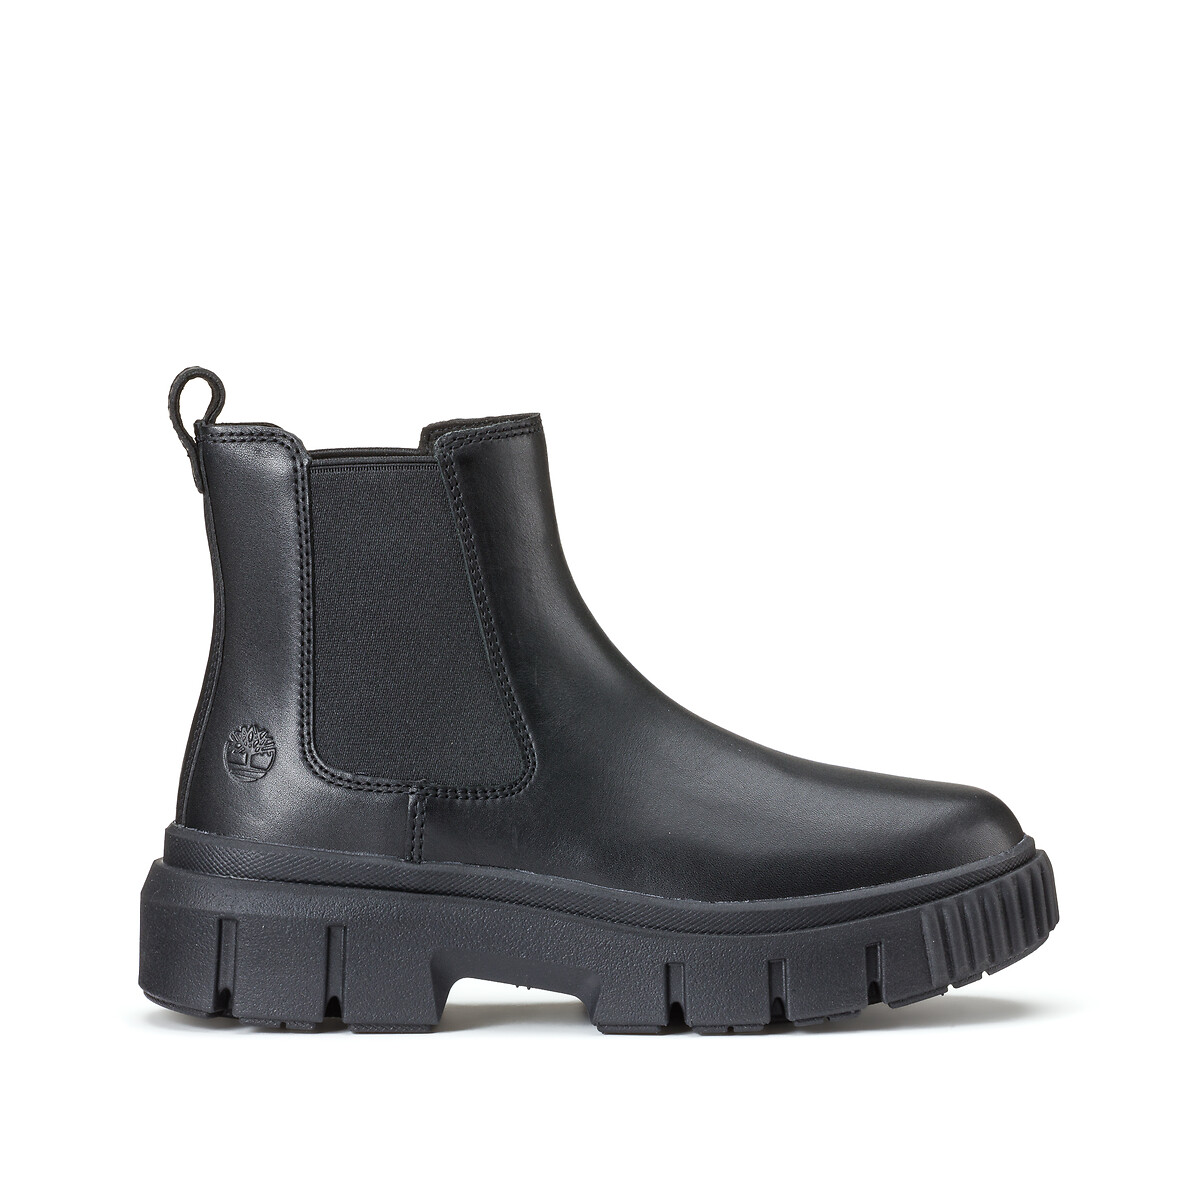 Greyfield leather chelsea boots, black, Timberland | La Redoute